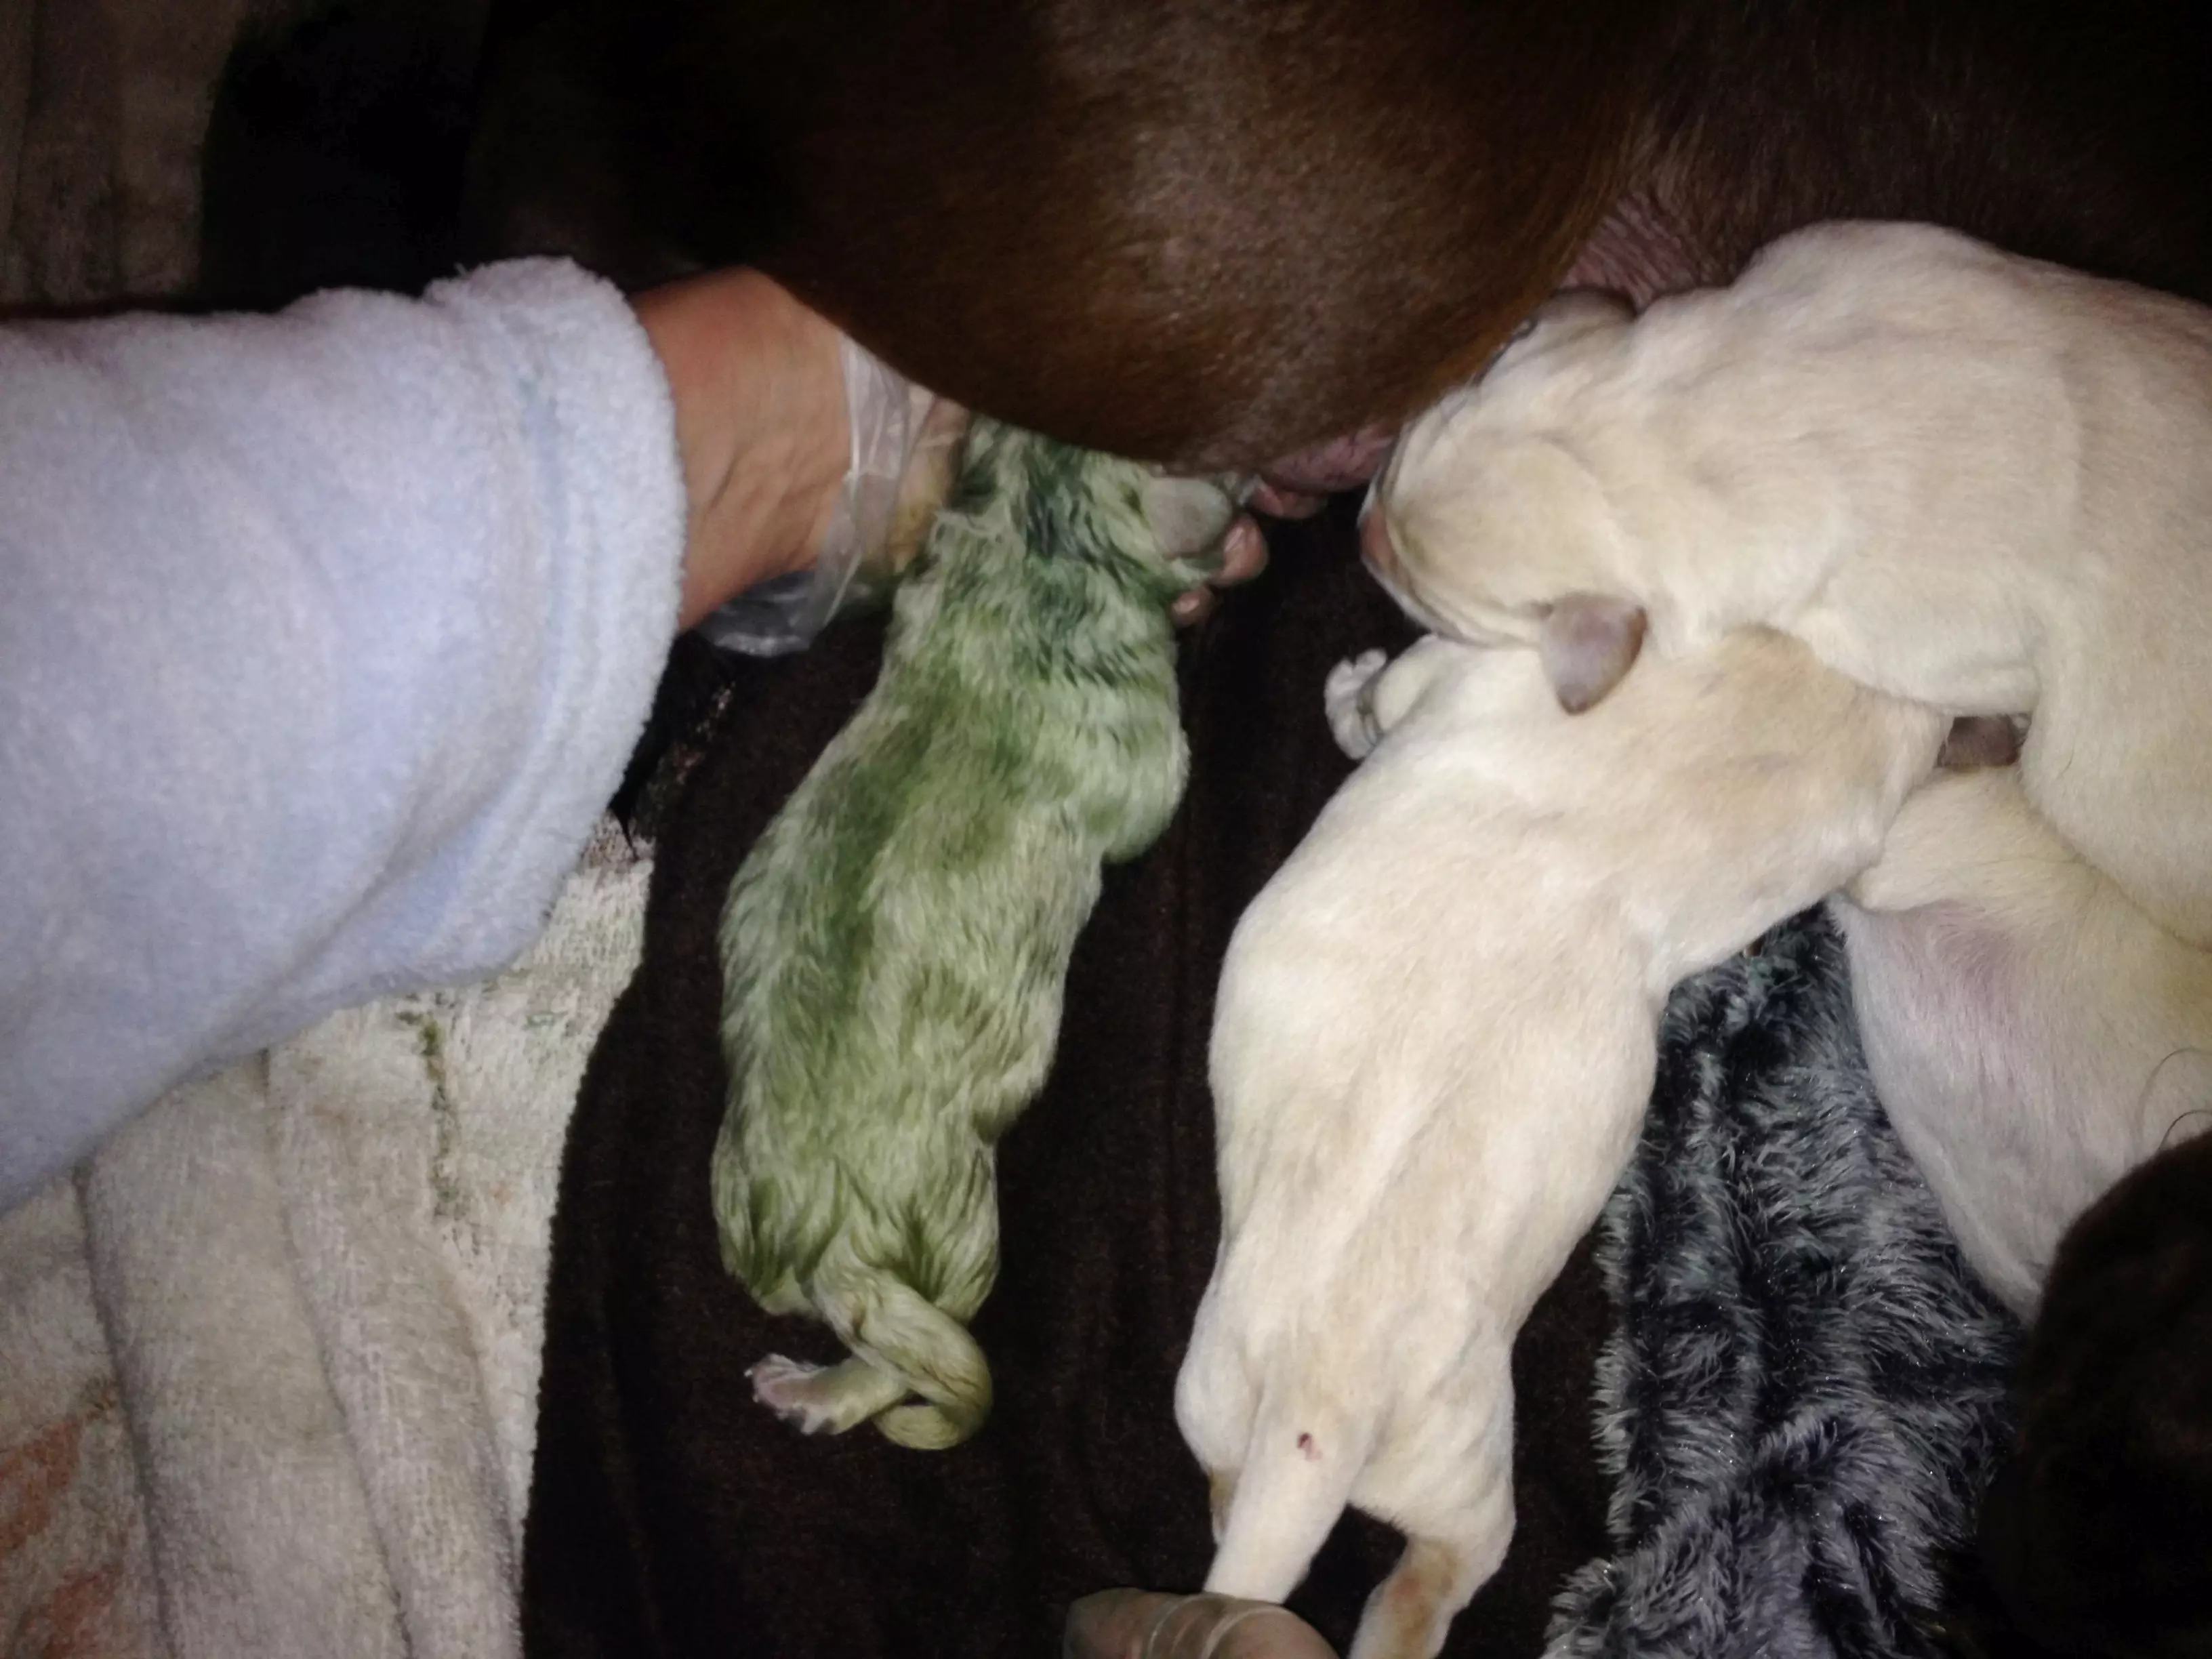 Owners Shocked As Labrador Gives Birth To Green Puppy